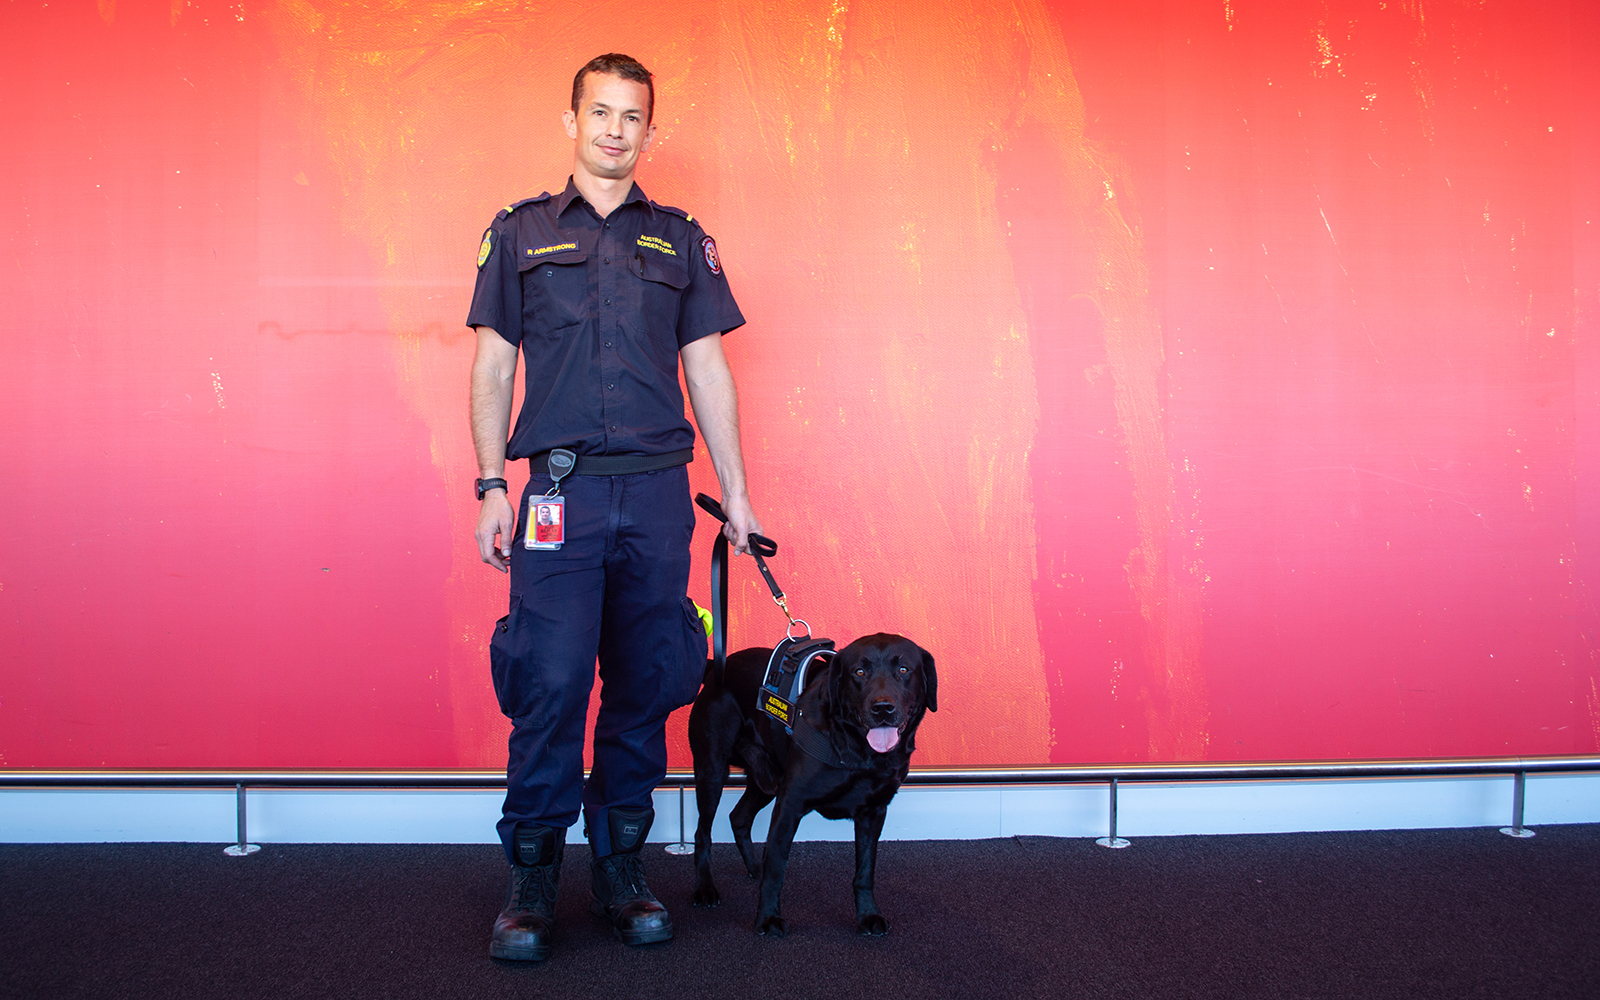 Australian Border Force Officer Rhys and Oggy